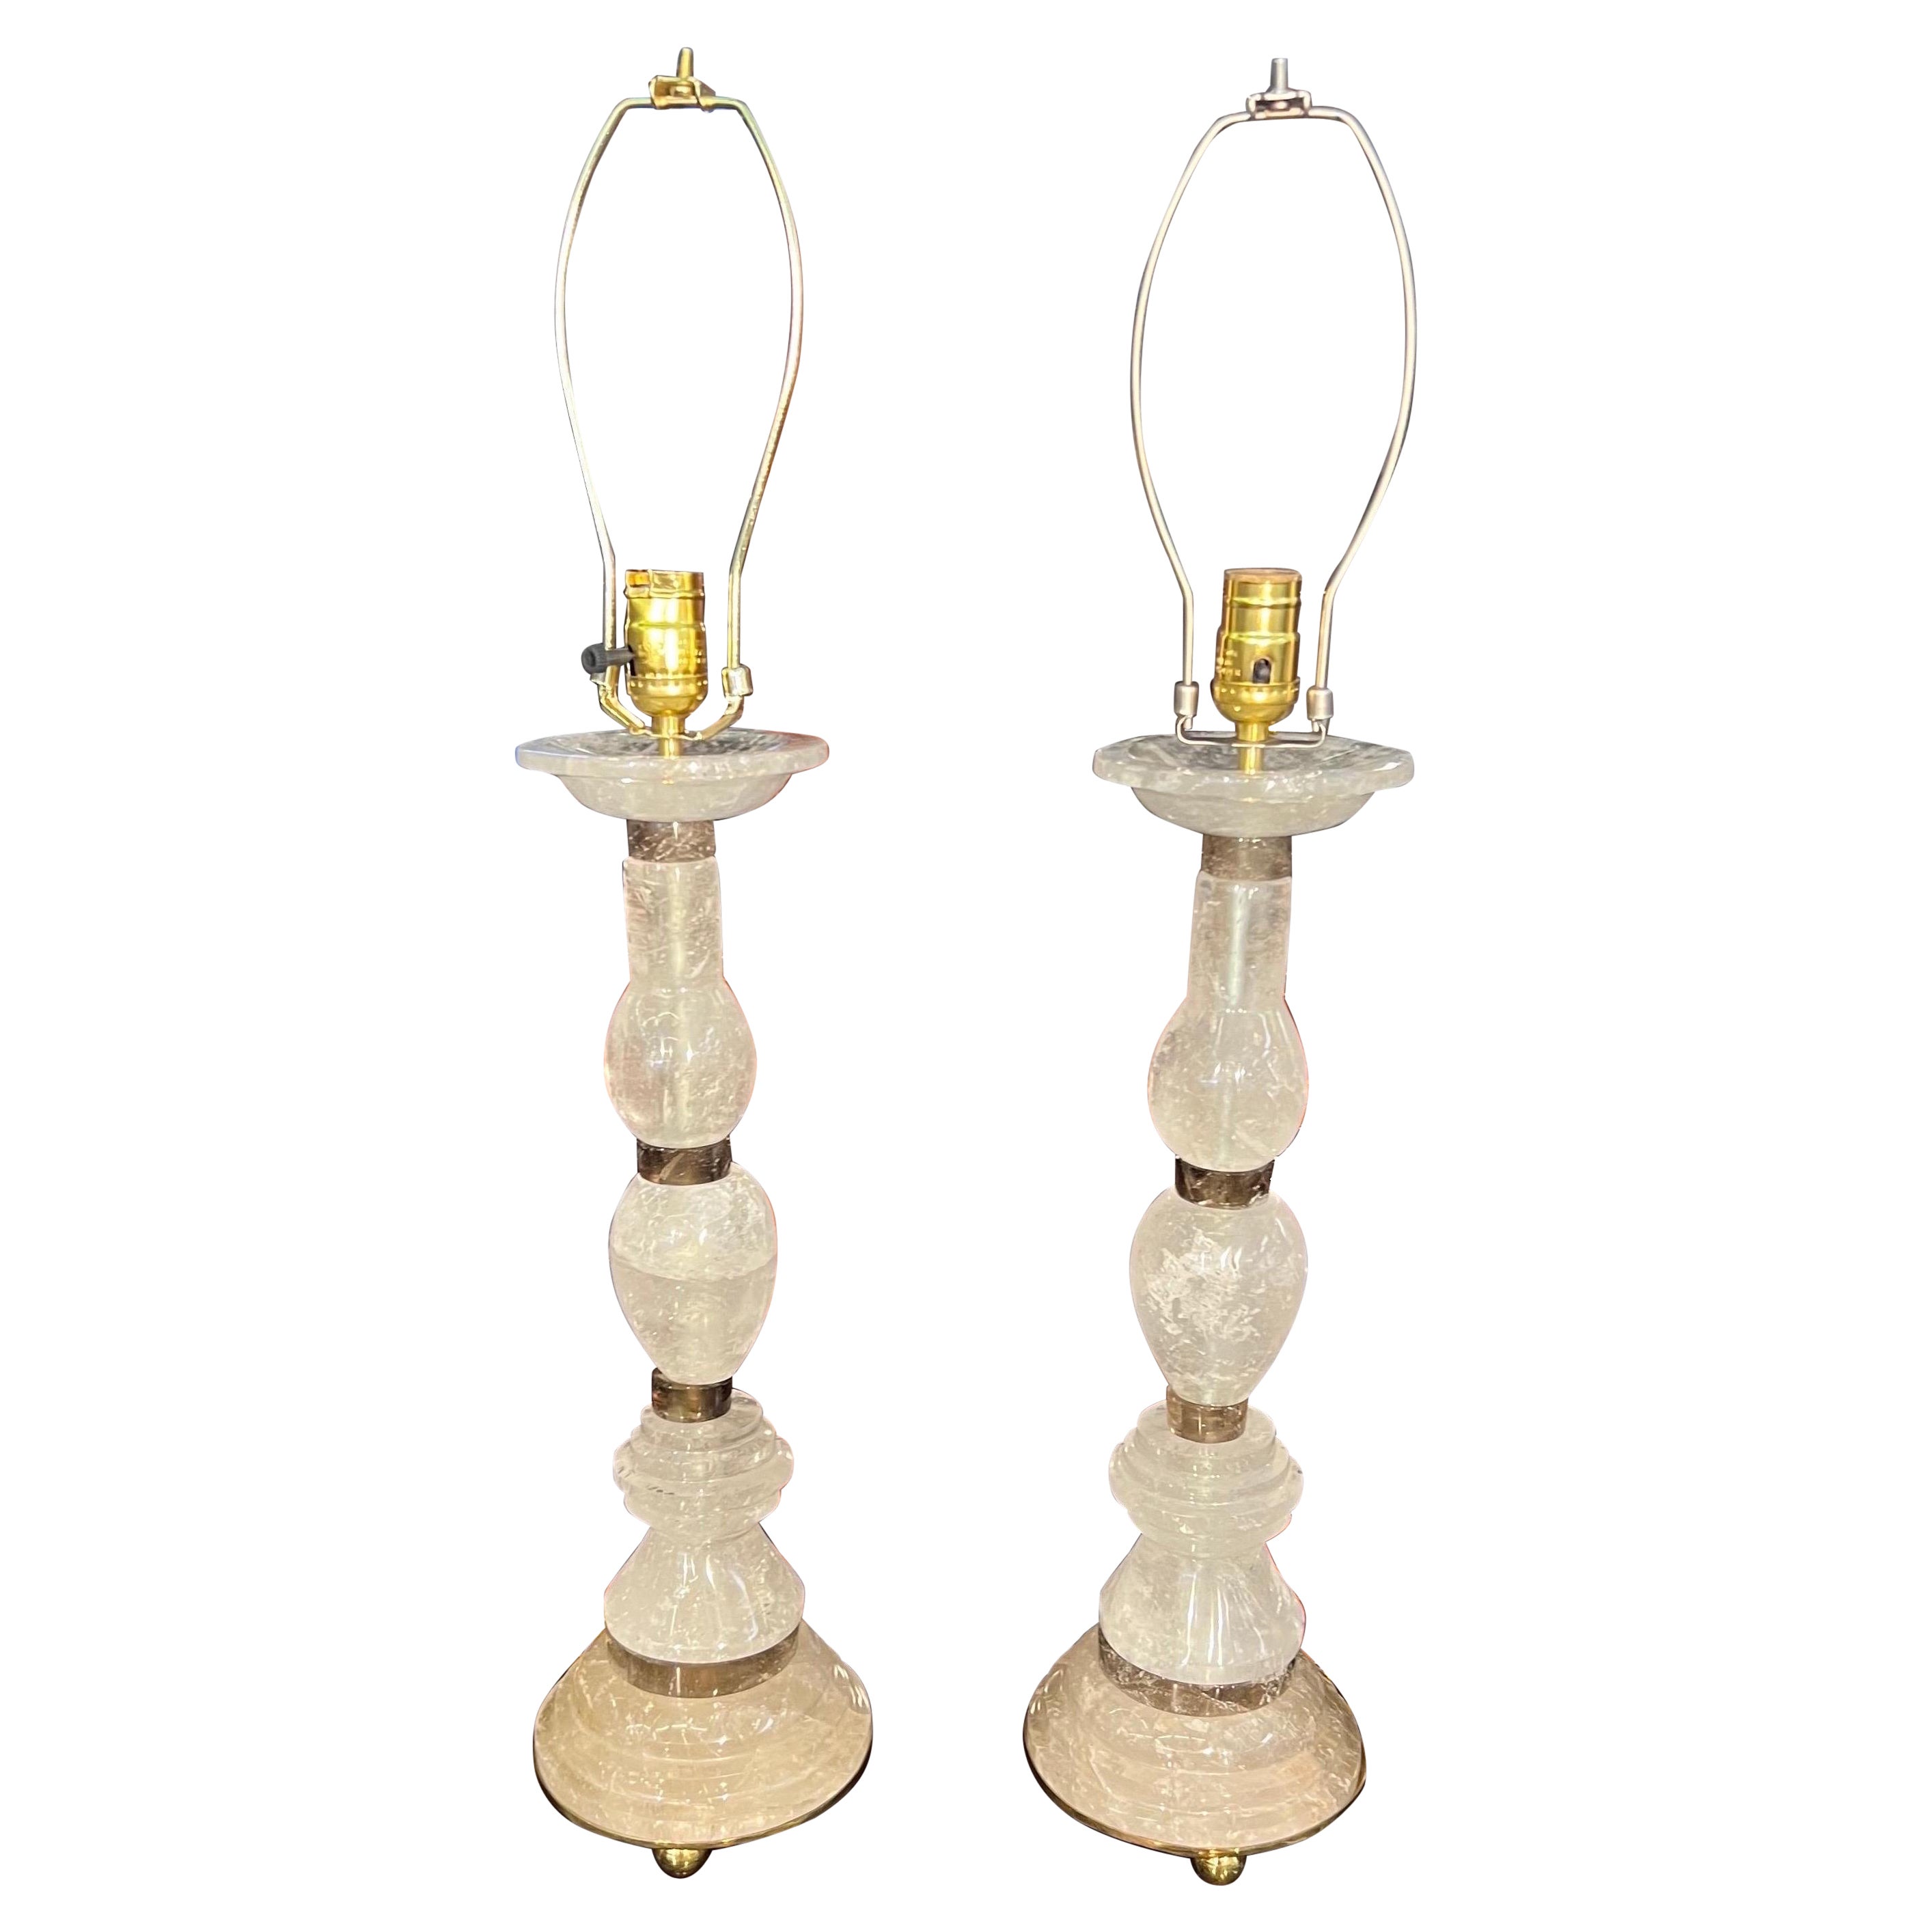 Pair of Deco style Rock crystal lamps 